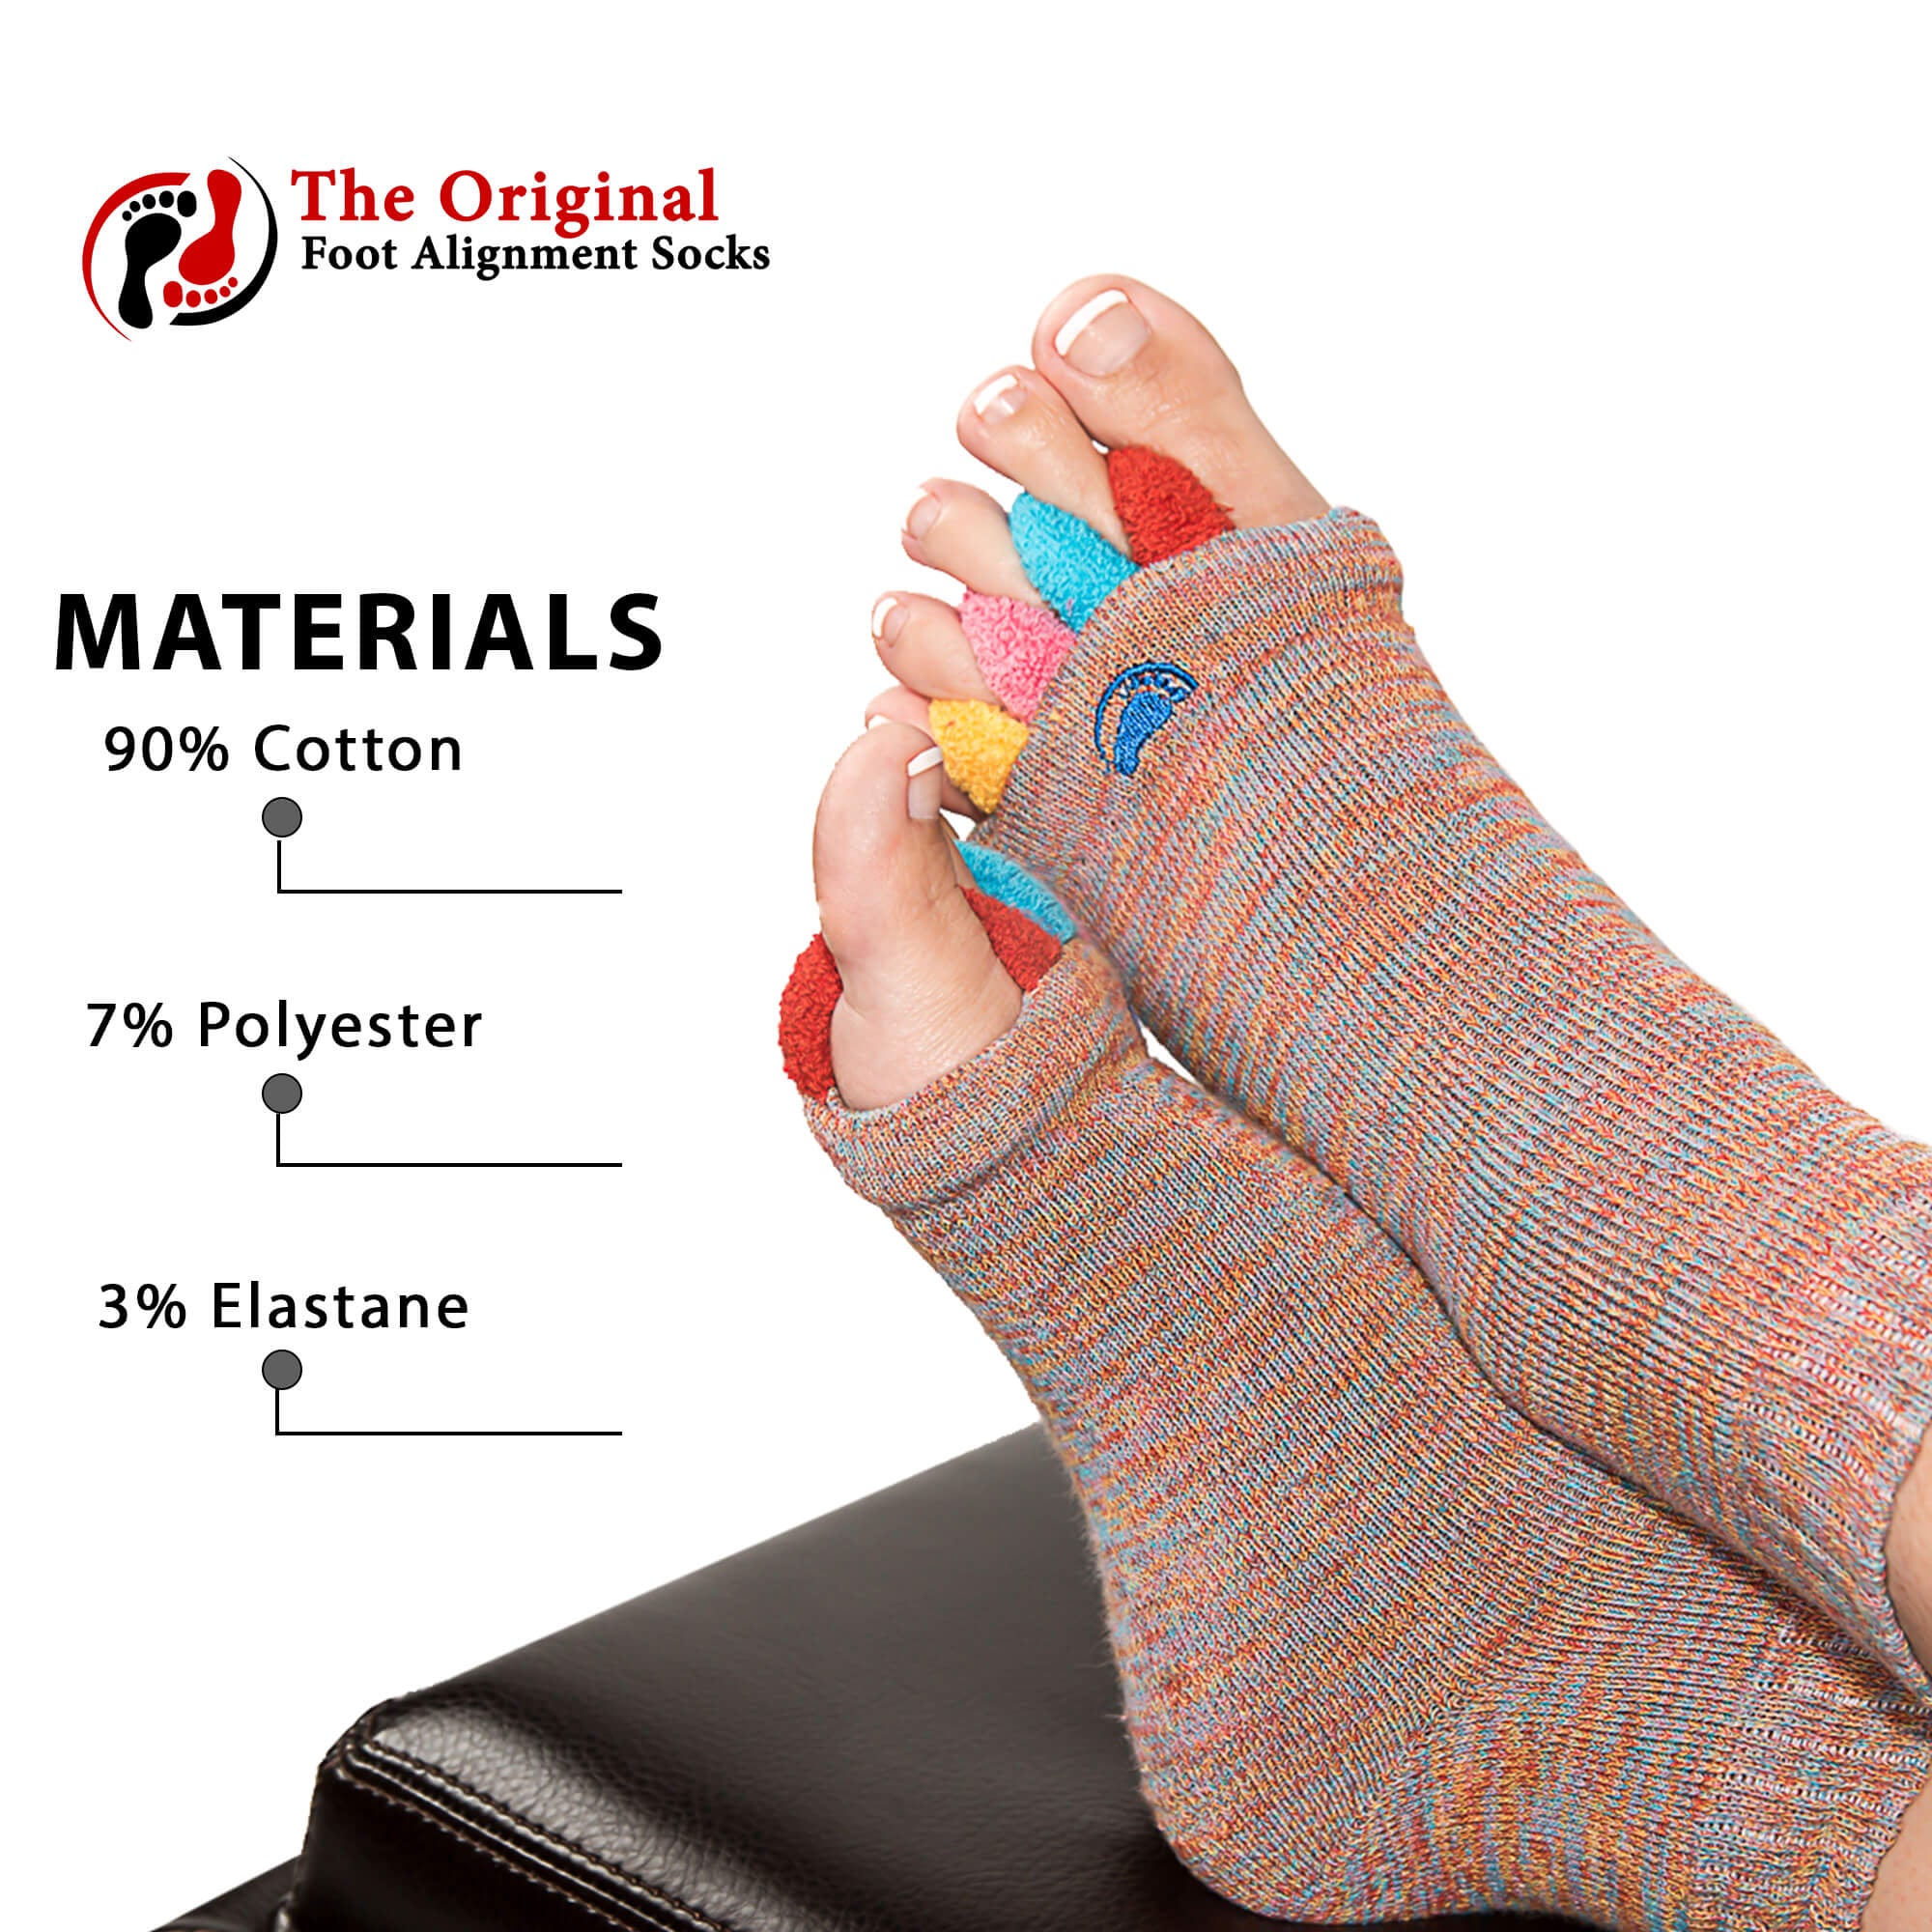 foot pain and sore feet relief with Cute Multi Color Alignment Socks – My-Happy  Feet - The Original Foot Alignment Socks